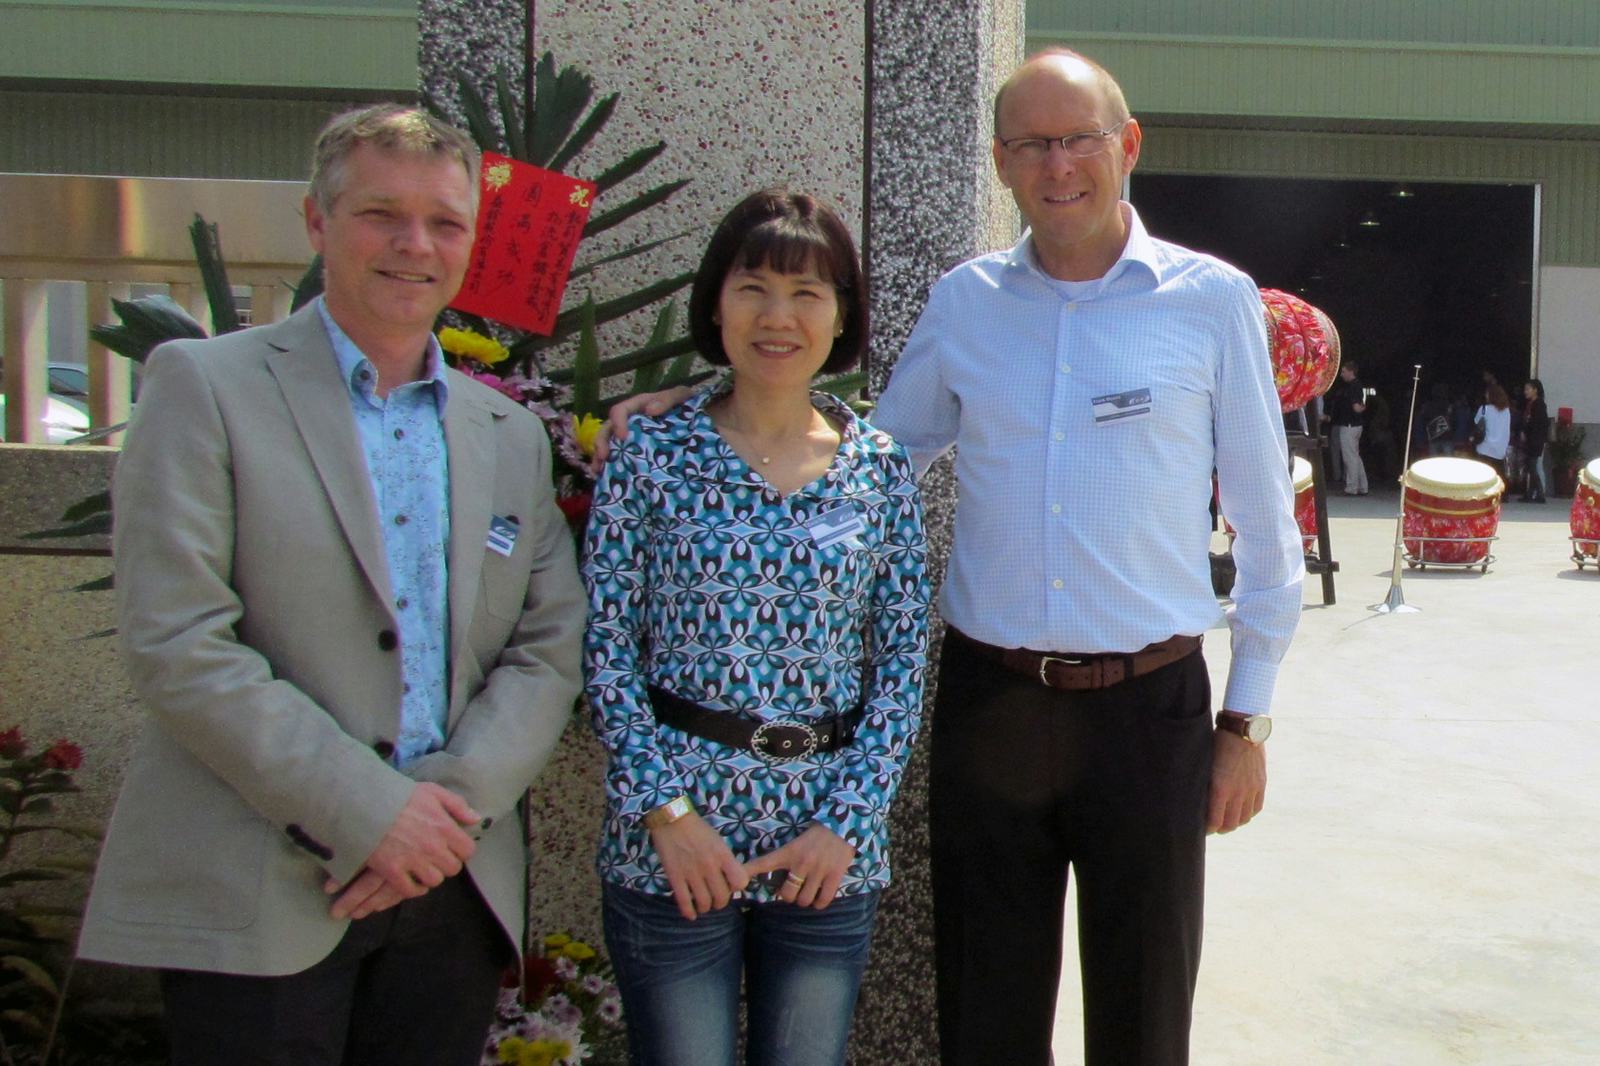 BBB founders Chris Koppert (left) and Frank Moons together with their Taiwanese partner Carrie Tsai from EC Sports, at the opening of their logistic centre in Taichung, Taiwan in 2011. – Photo Bike Europe